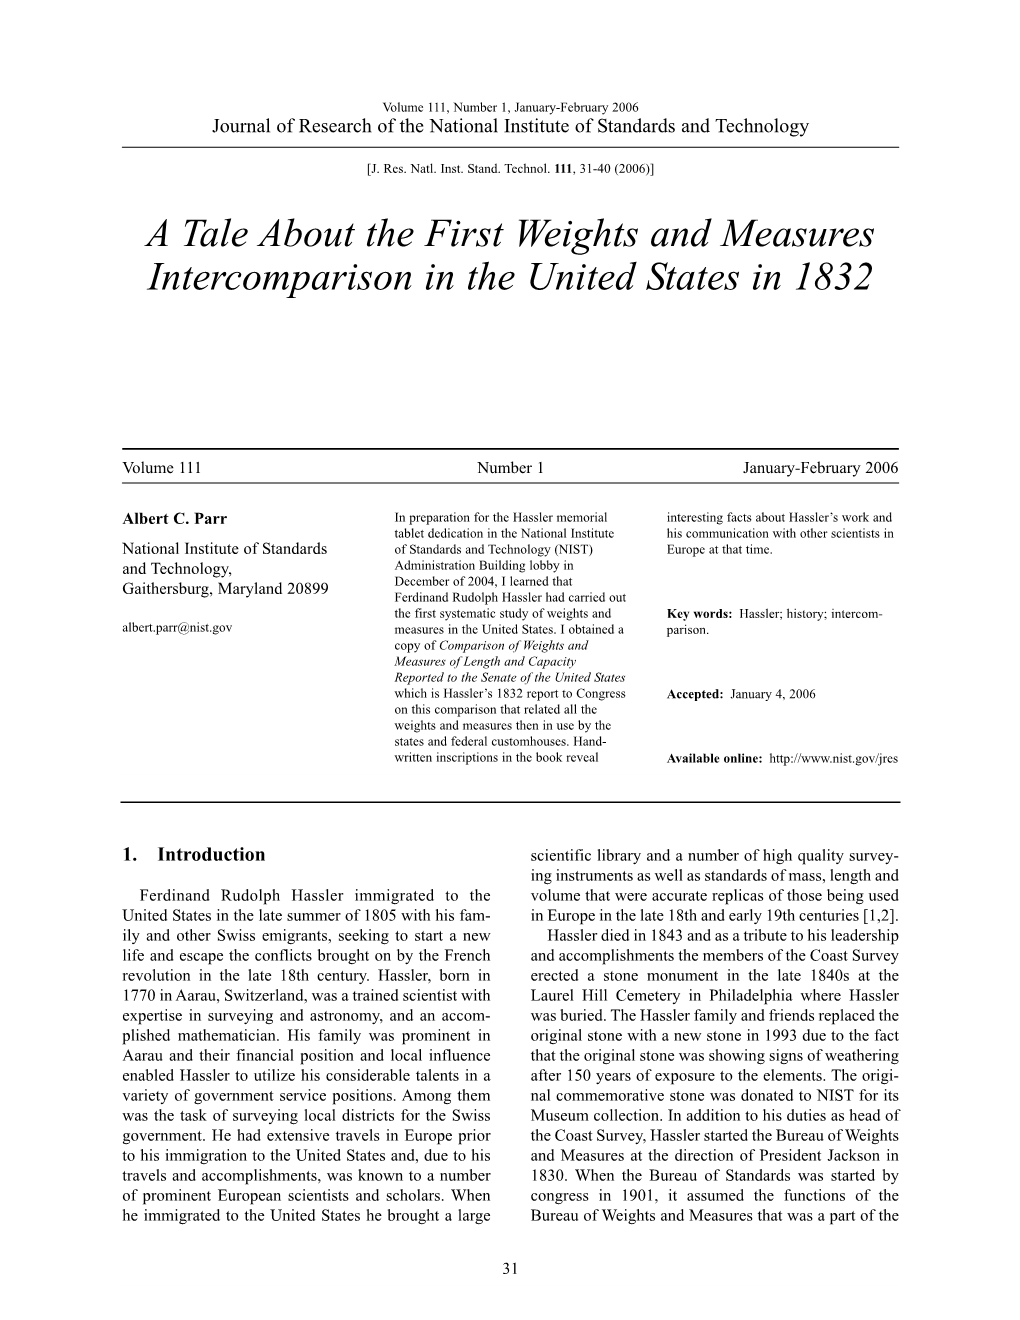 A Tale About the First Weights and Measures Intercomparison in the United States in 1832